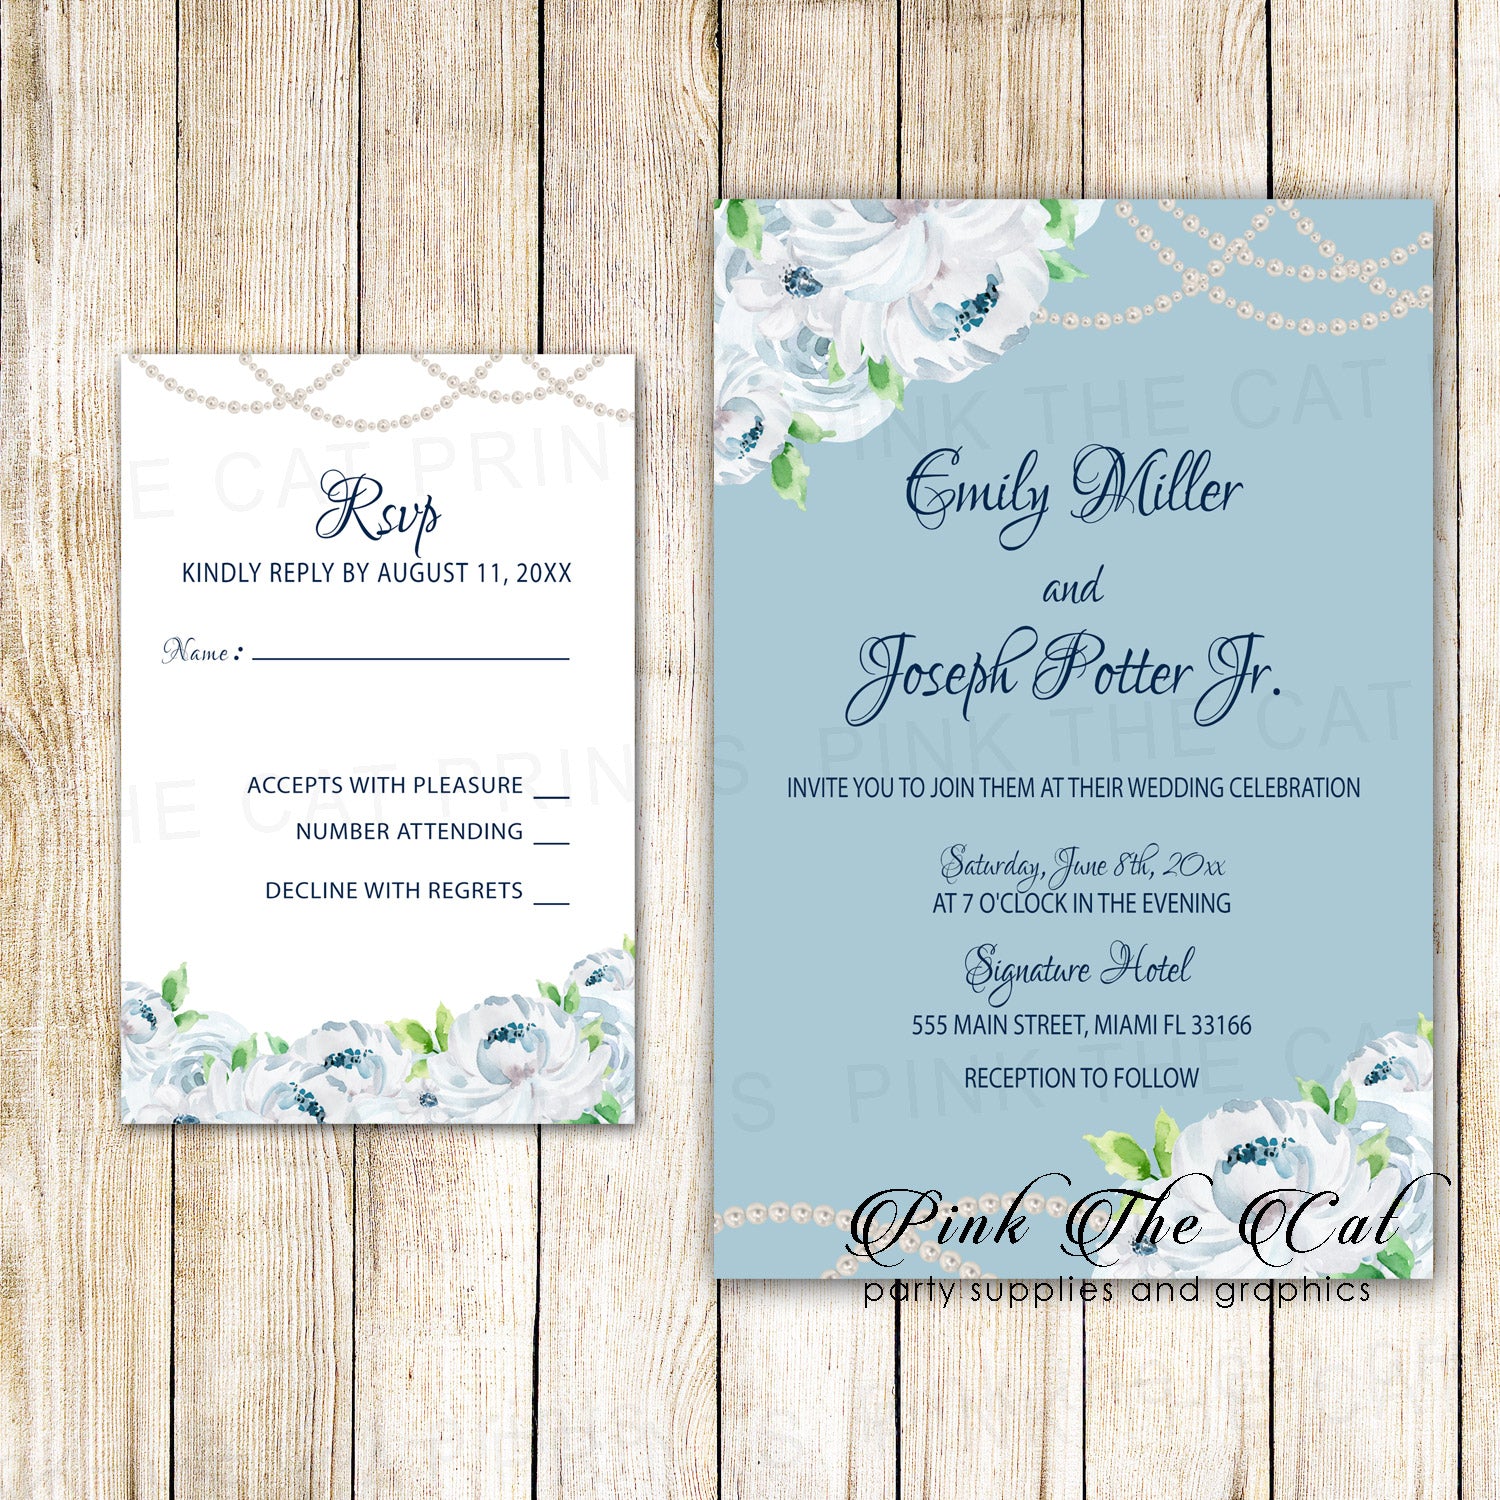 Floral Wedding Invitations & RSVP Cards White Roses Pearls Blue printable